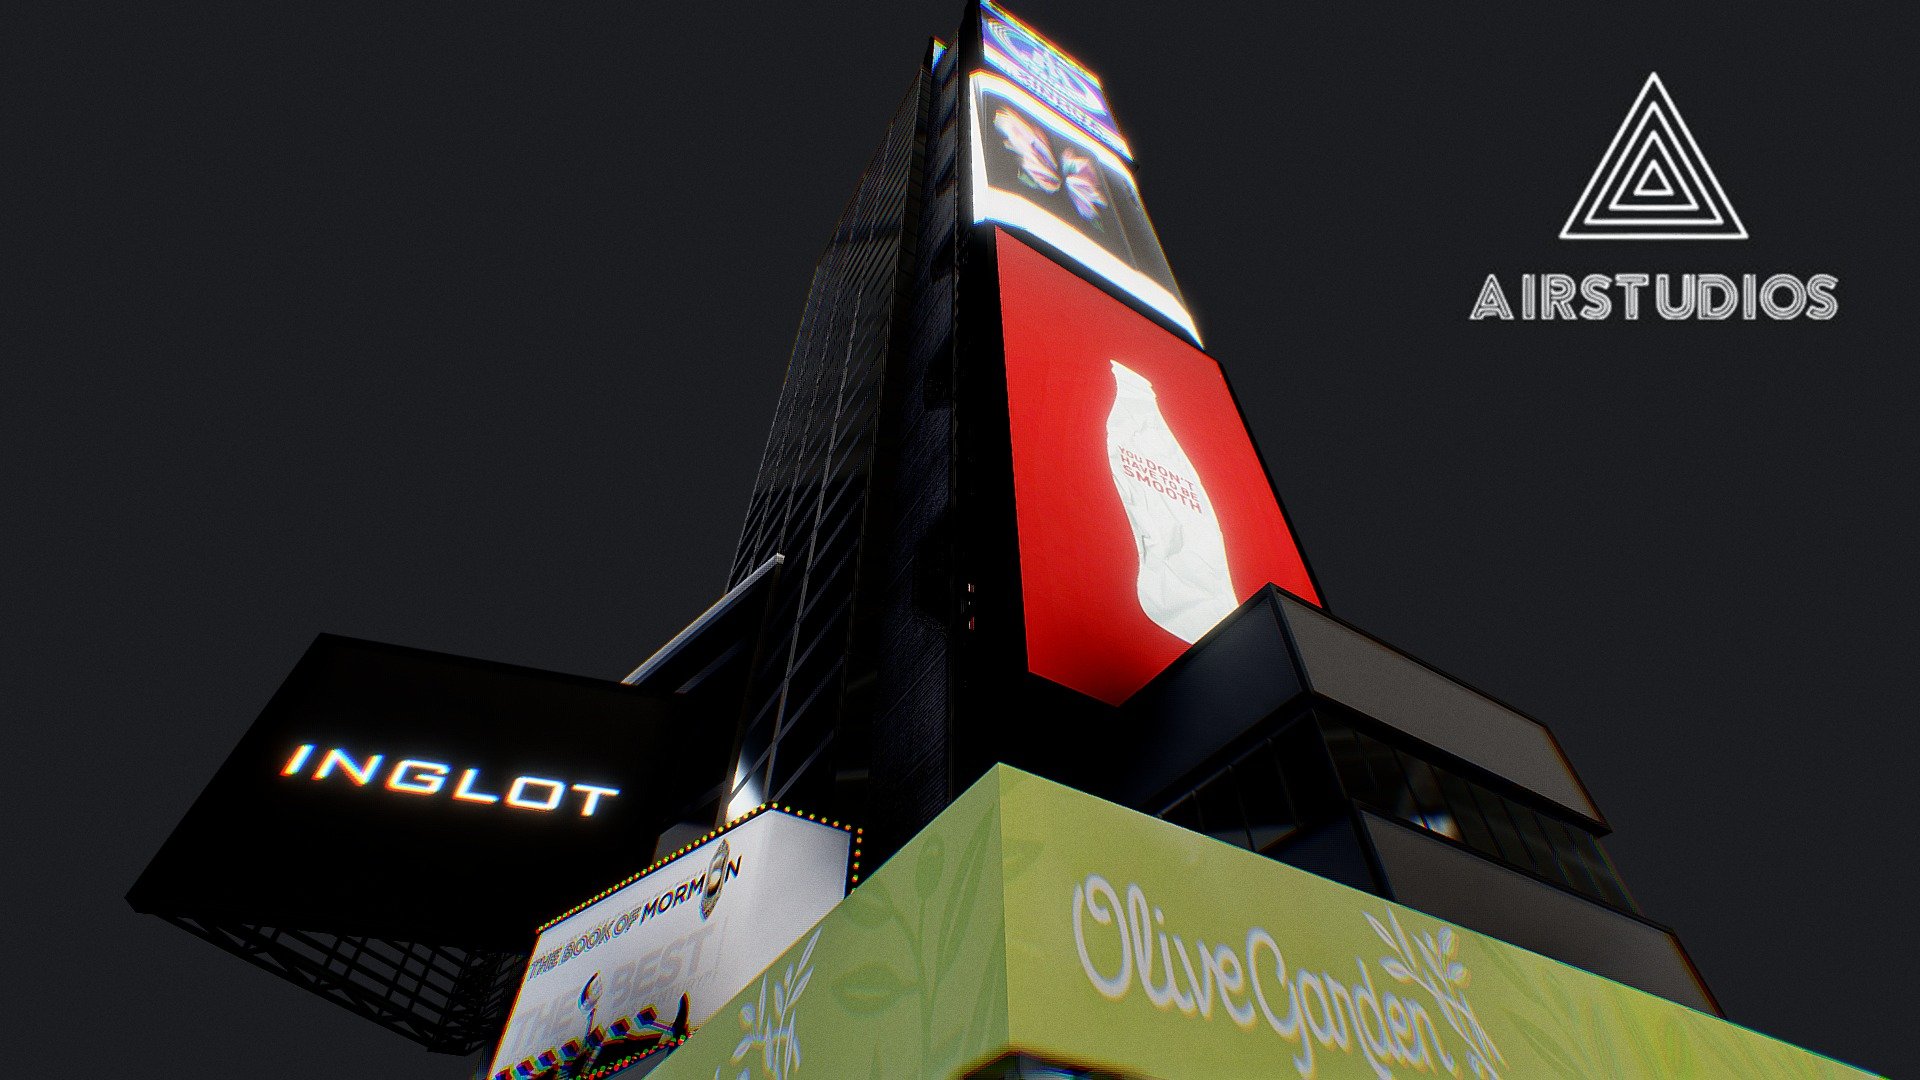 Times Square Building

Made in Blender - Times Square Building - Buy Royalty Free 3D model by AirStudios (@sebbe613) 3d model